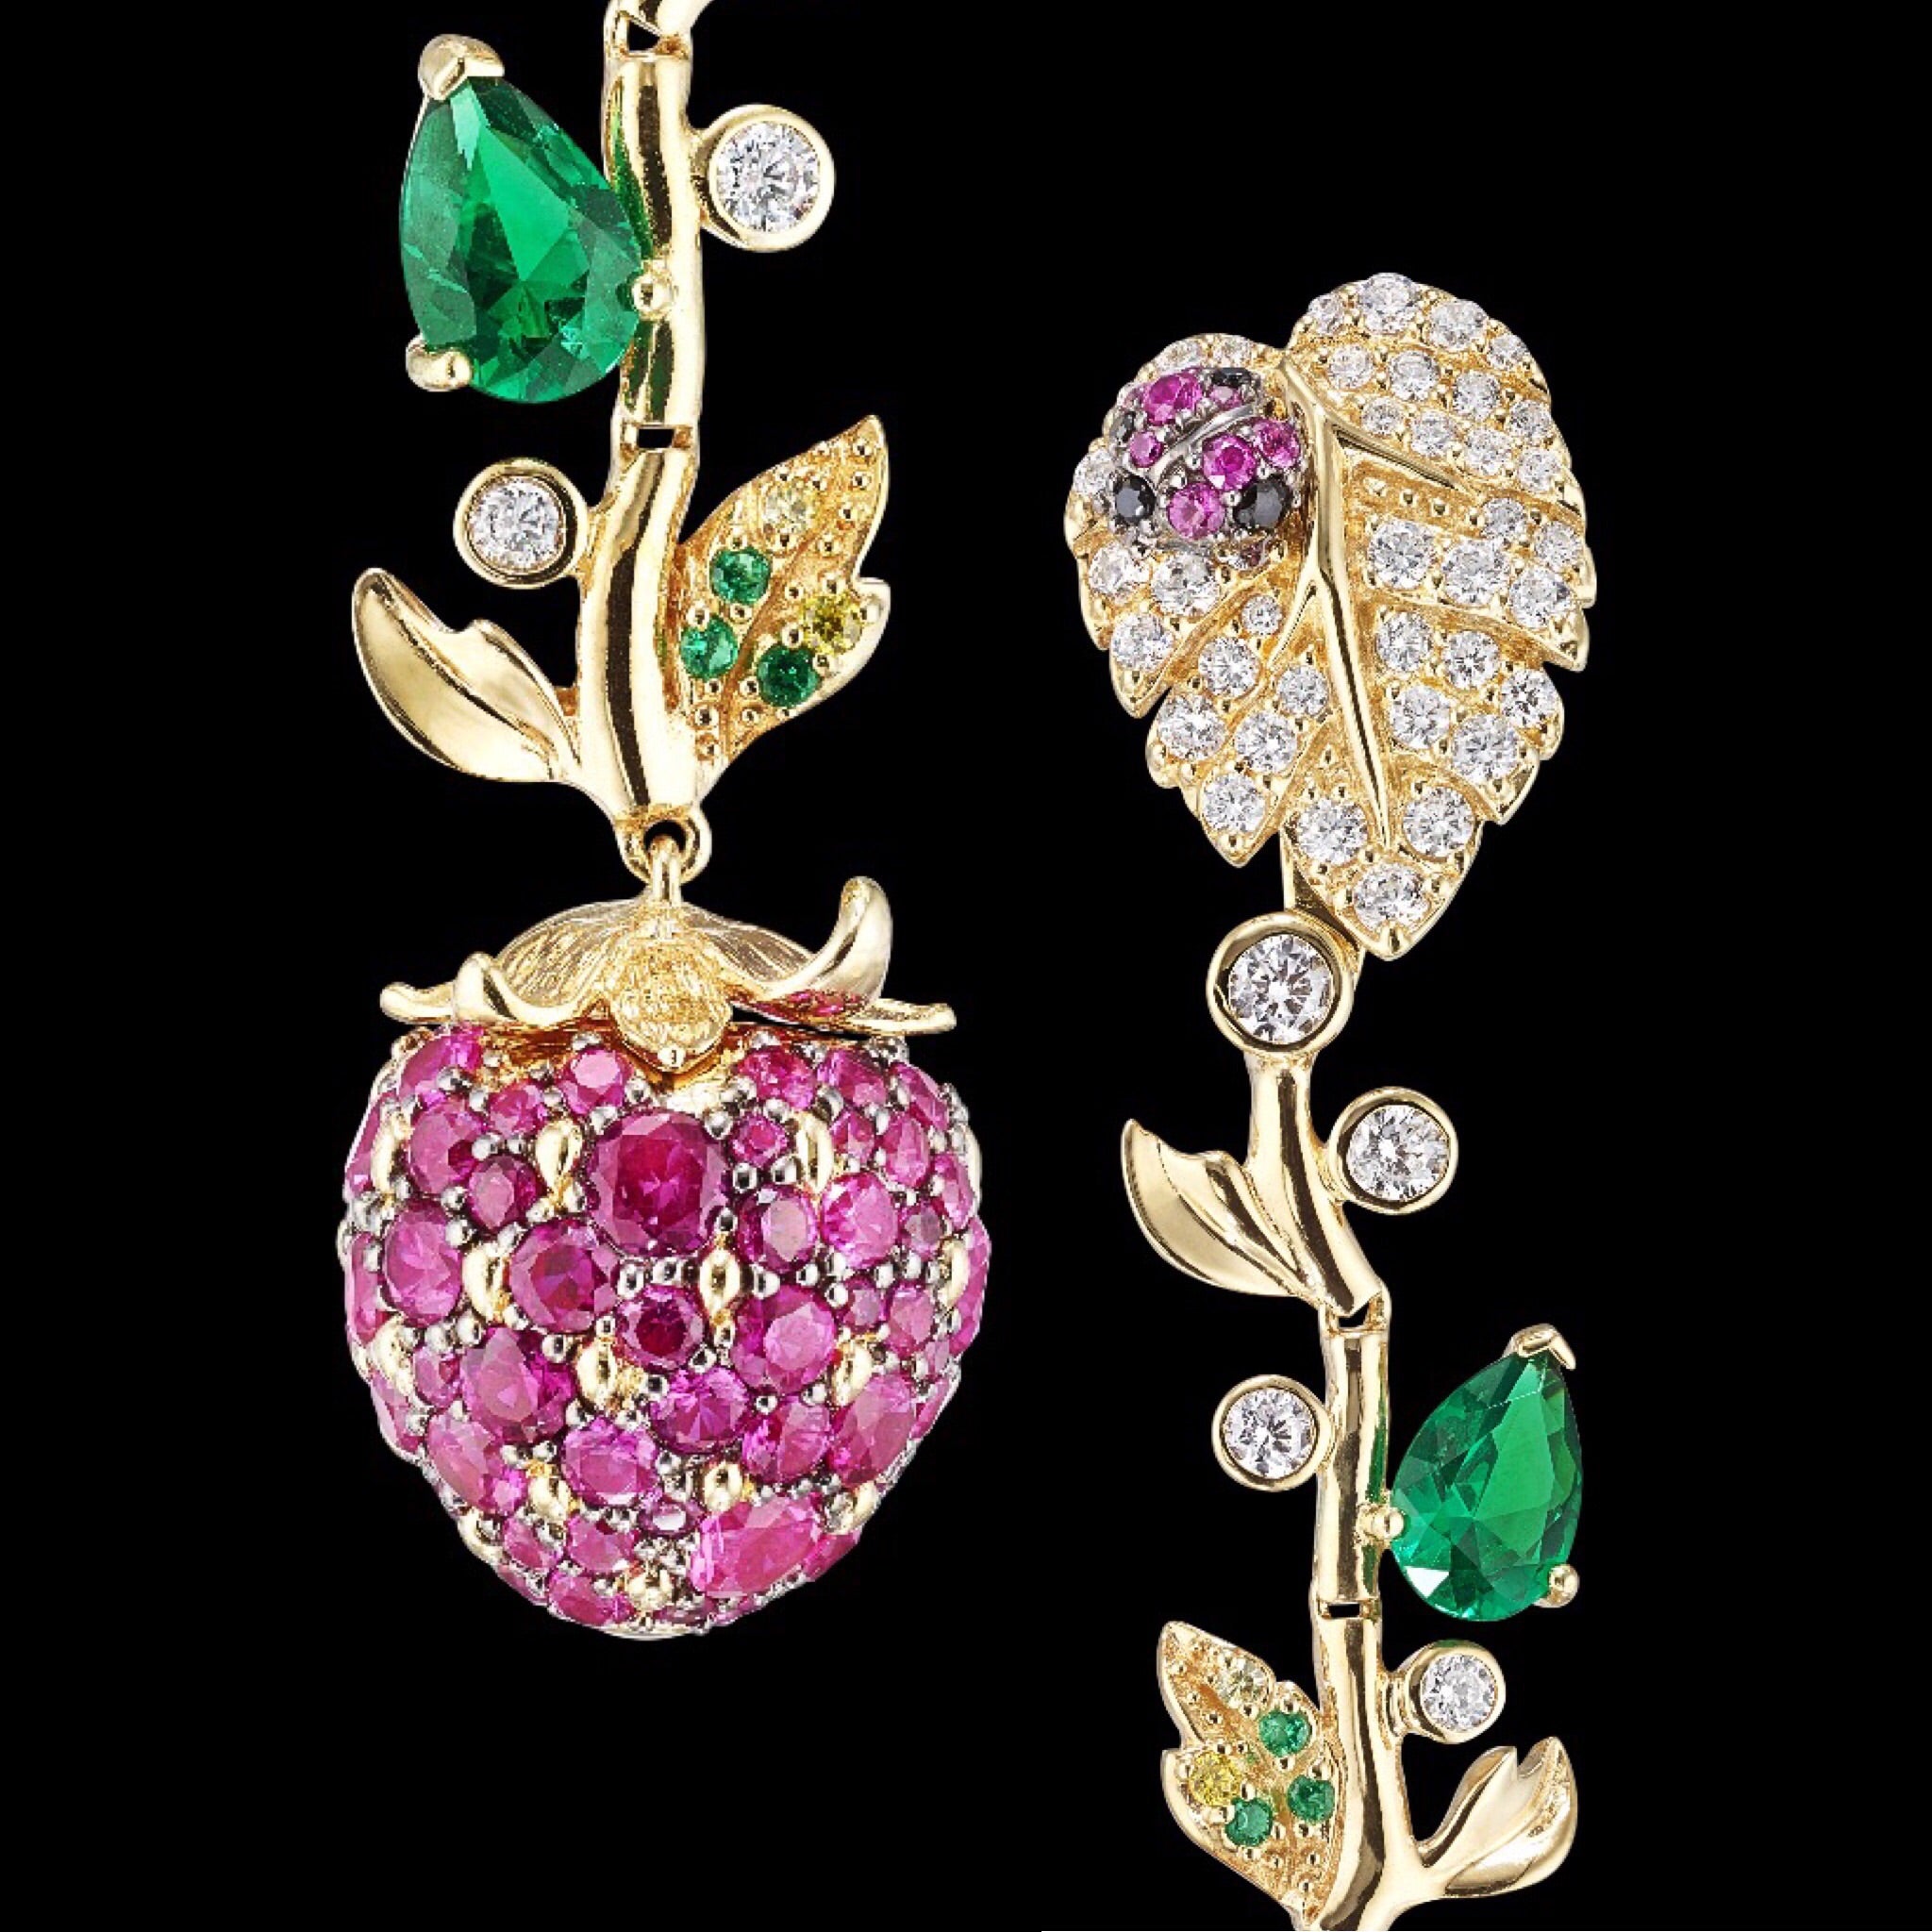 Strawberry Vine Earrings, Earring, Anabela Chan Joaillerie - Fine jewelry with laboratory grown and created gemstones hand-crafted in the United Kingdom. Anabela Chan Joaillerie is the first fine jewellery brand in the world to champion laboratory-grown and created gemstones with high jewellery design, artisanal craftsmanship and a focus on ethical and sustainable innovations.